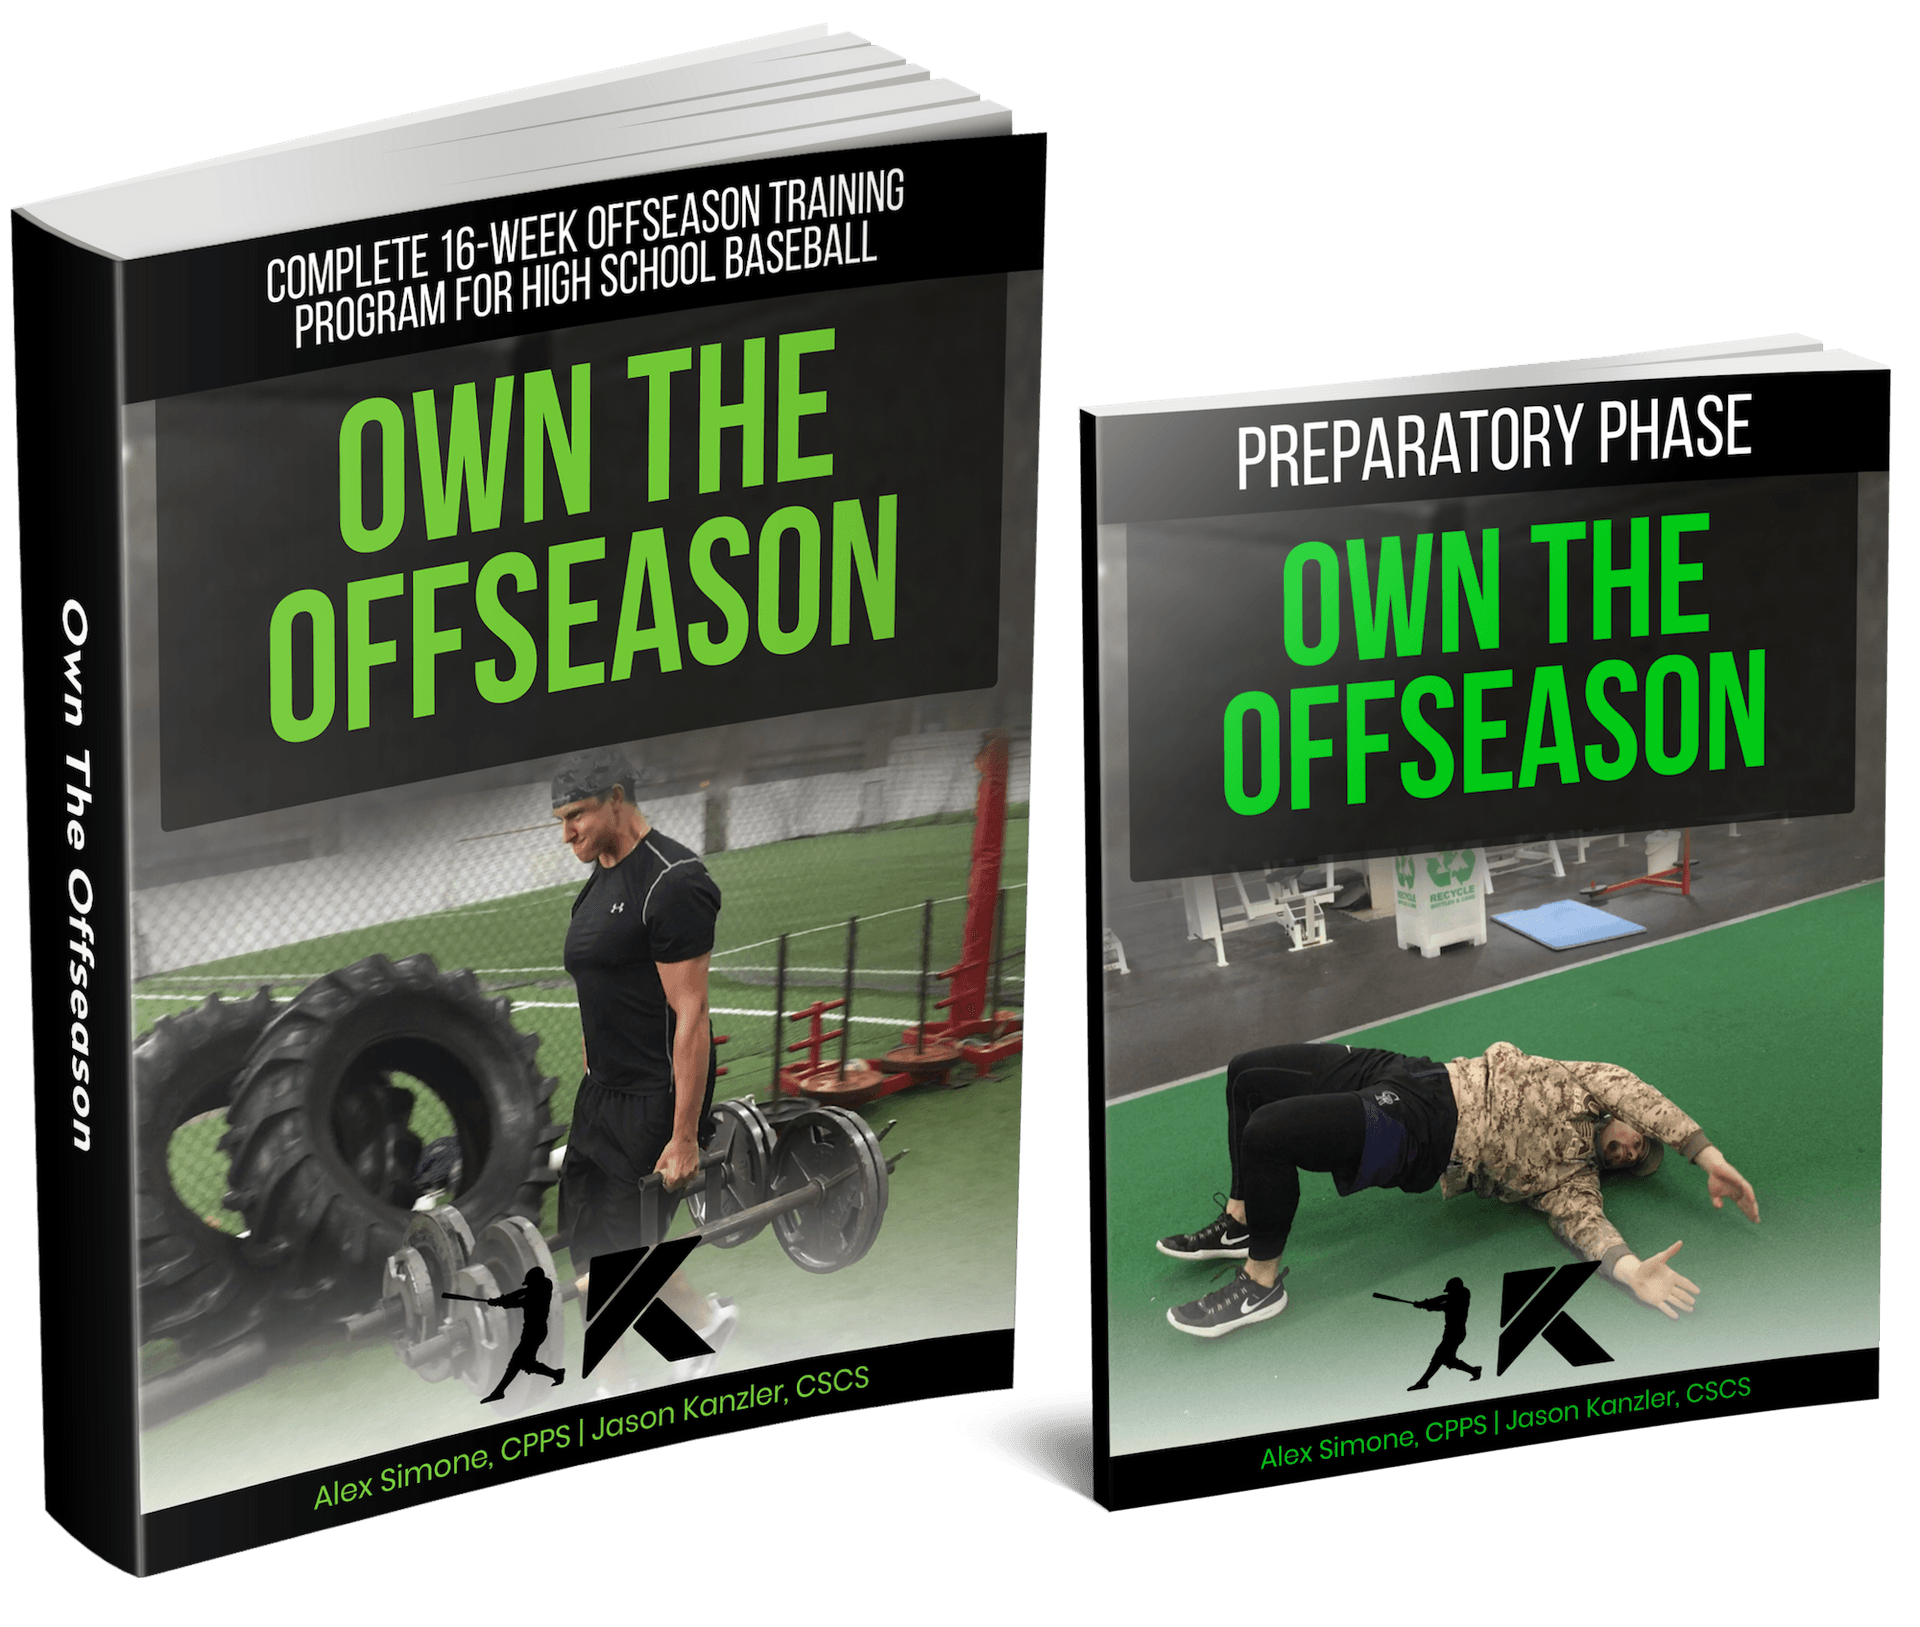 Own the Offseason book covers